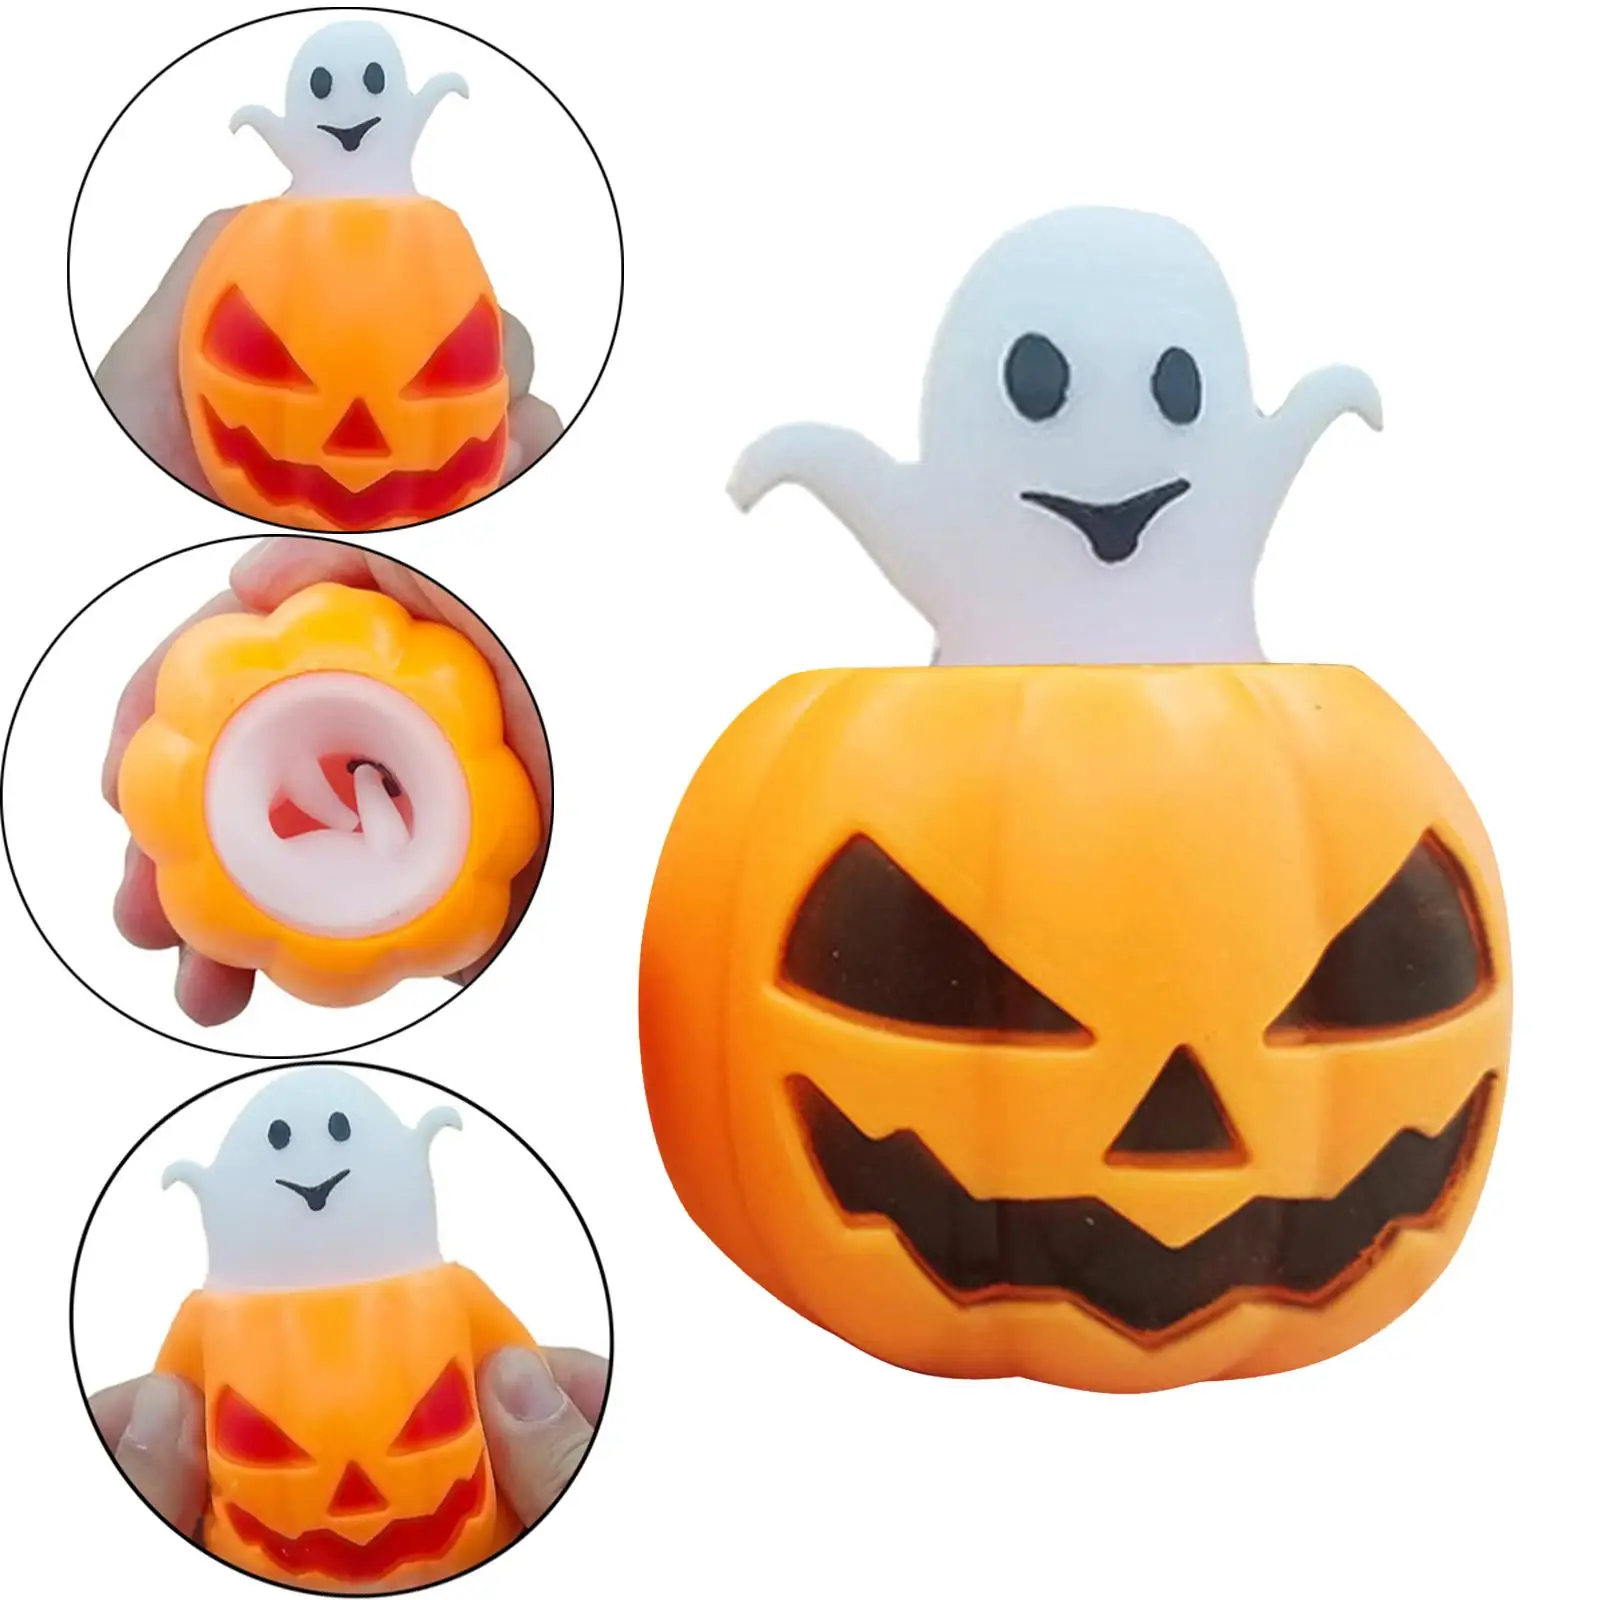 Funny Squeeze Pumpkin Sensory Toys Simulation Soft for Kids Boys and Girls Adults Xmas Gifts